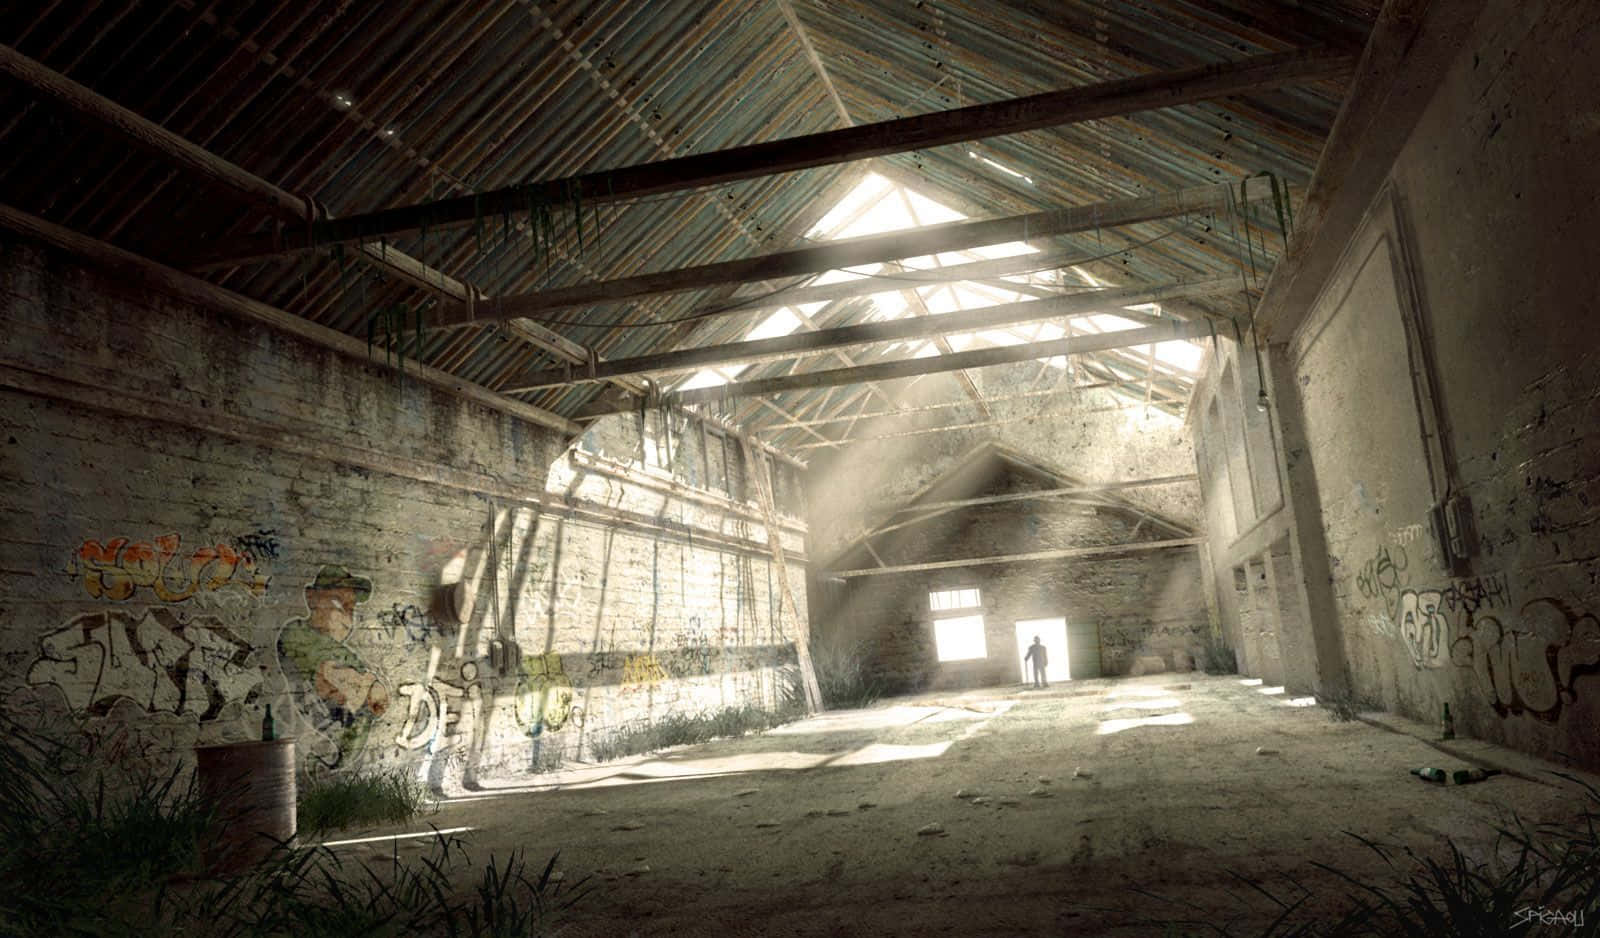 A Dark, Abandoned Warehouse With A Light Shining Through The Windows